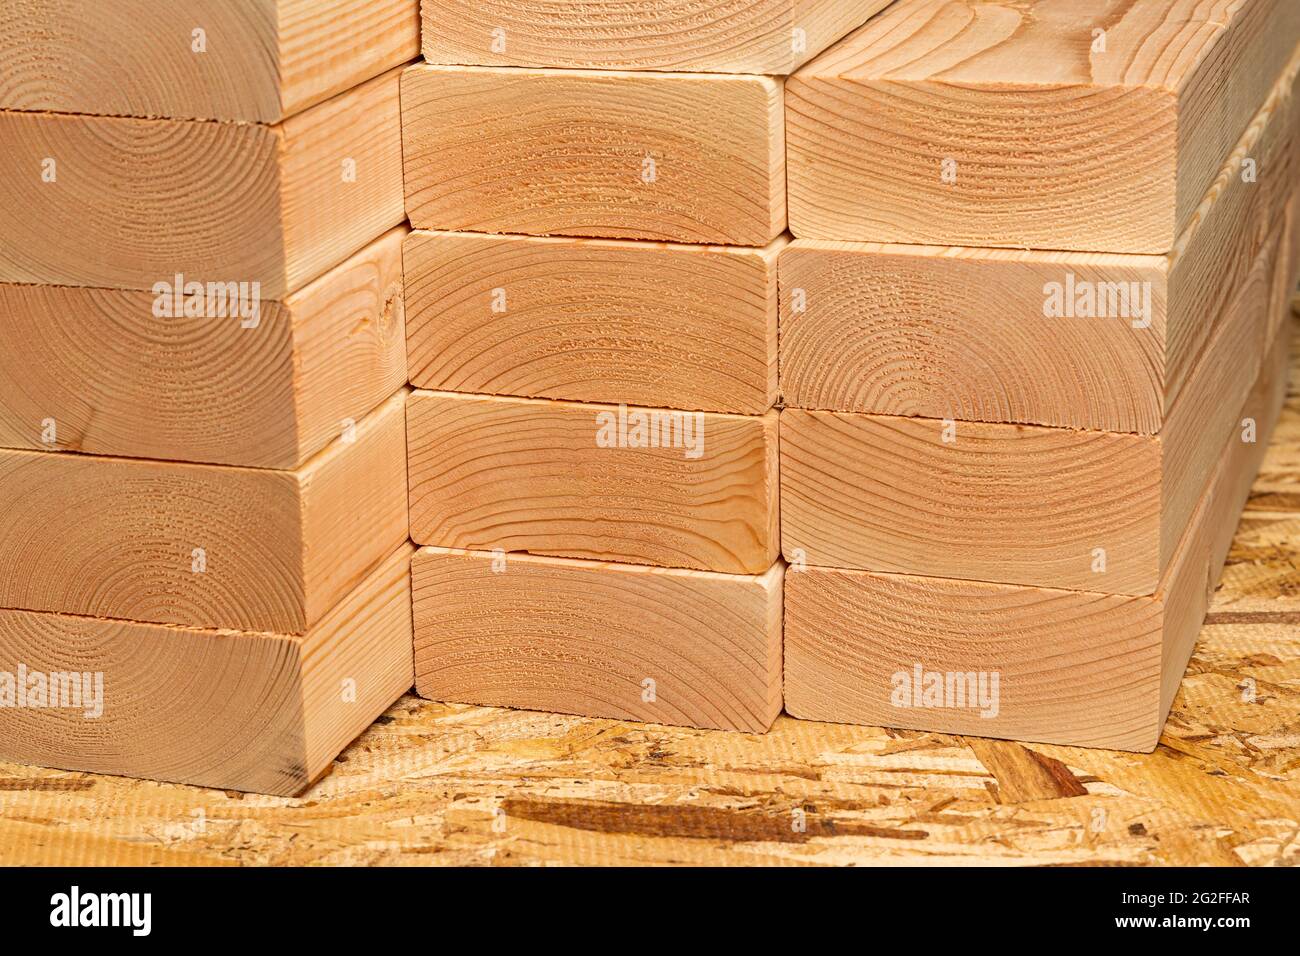 Closeup of construction lumber boards. Building materials price increase, home construction and remodeling cost concept. Stock Photo